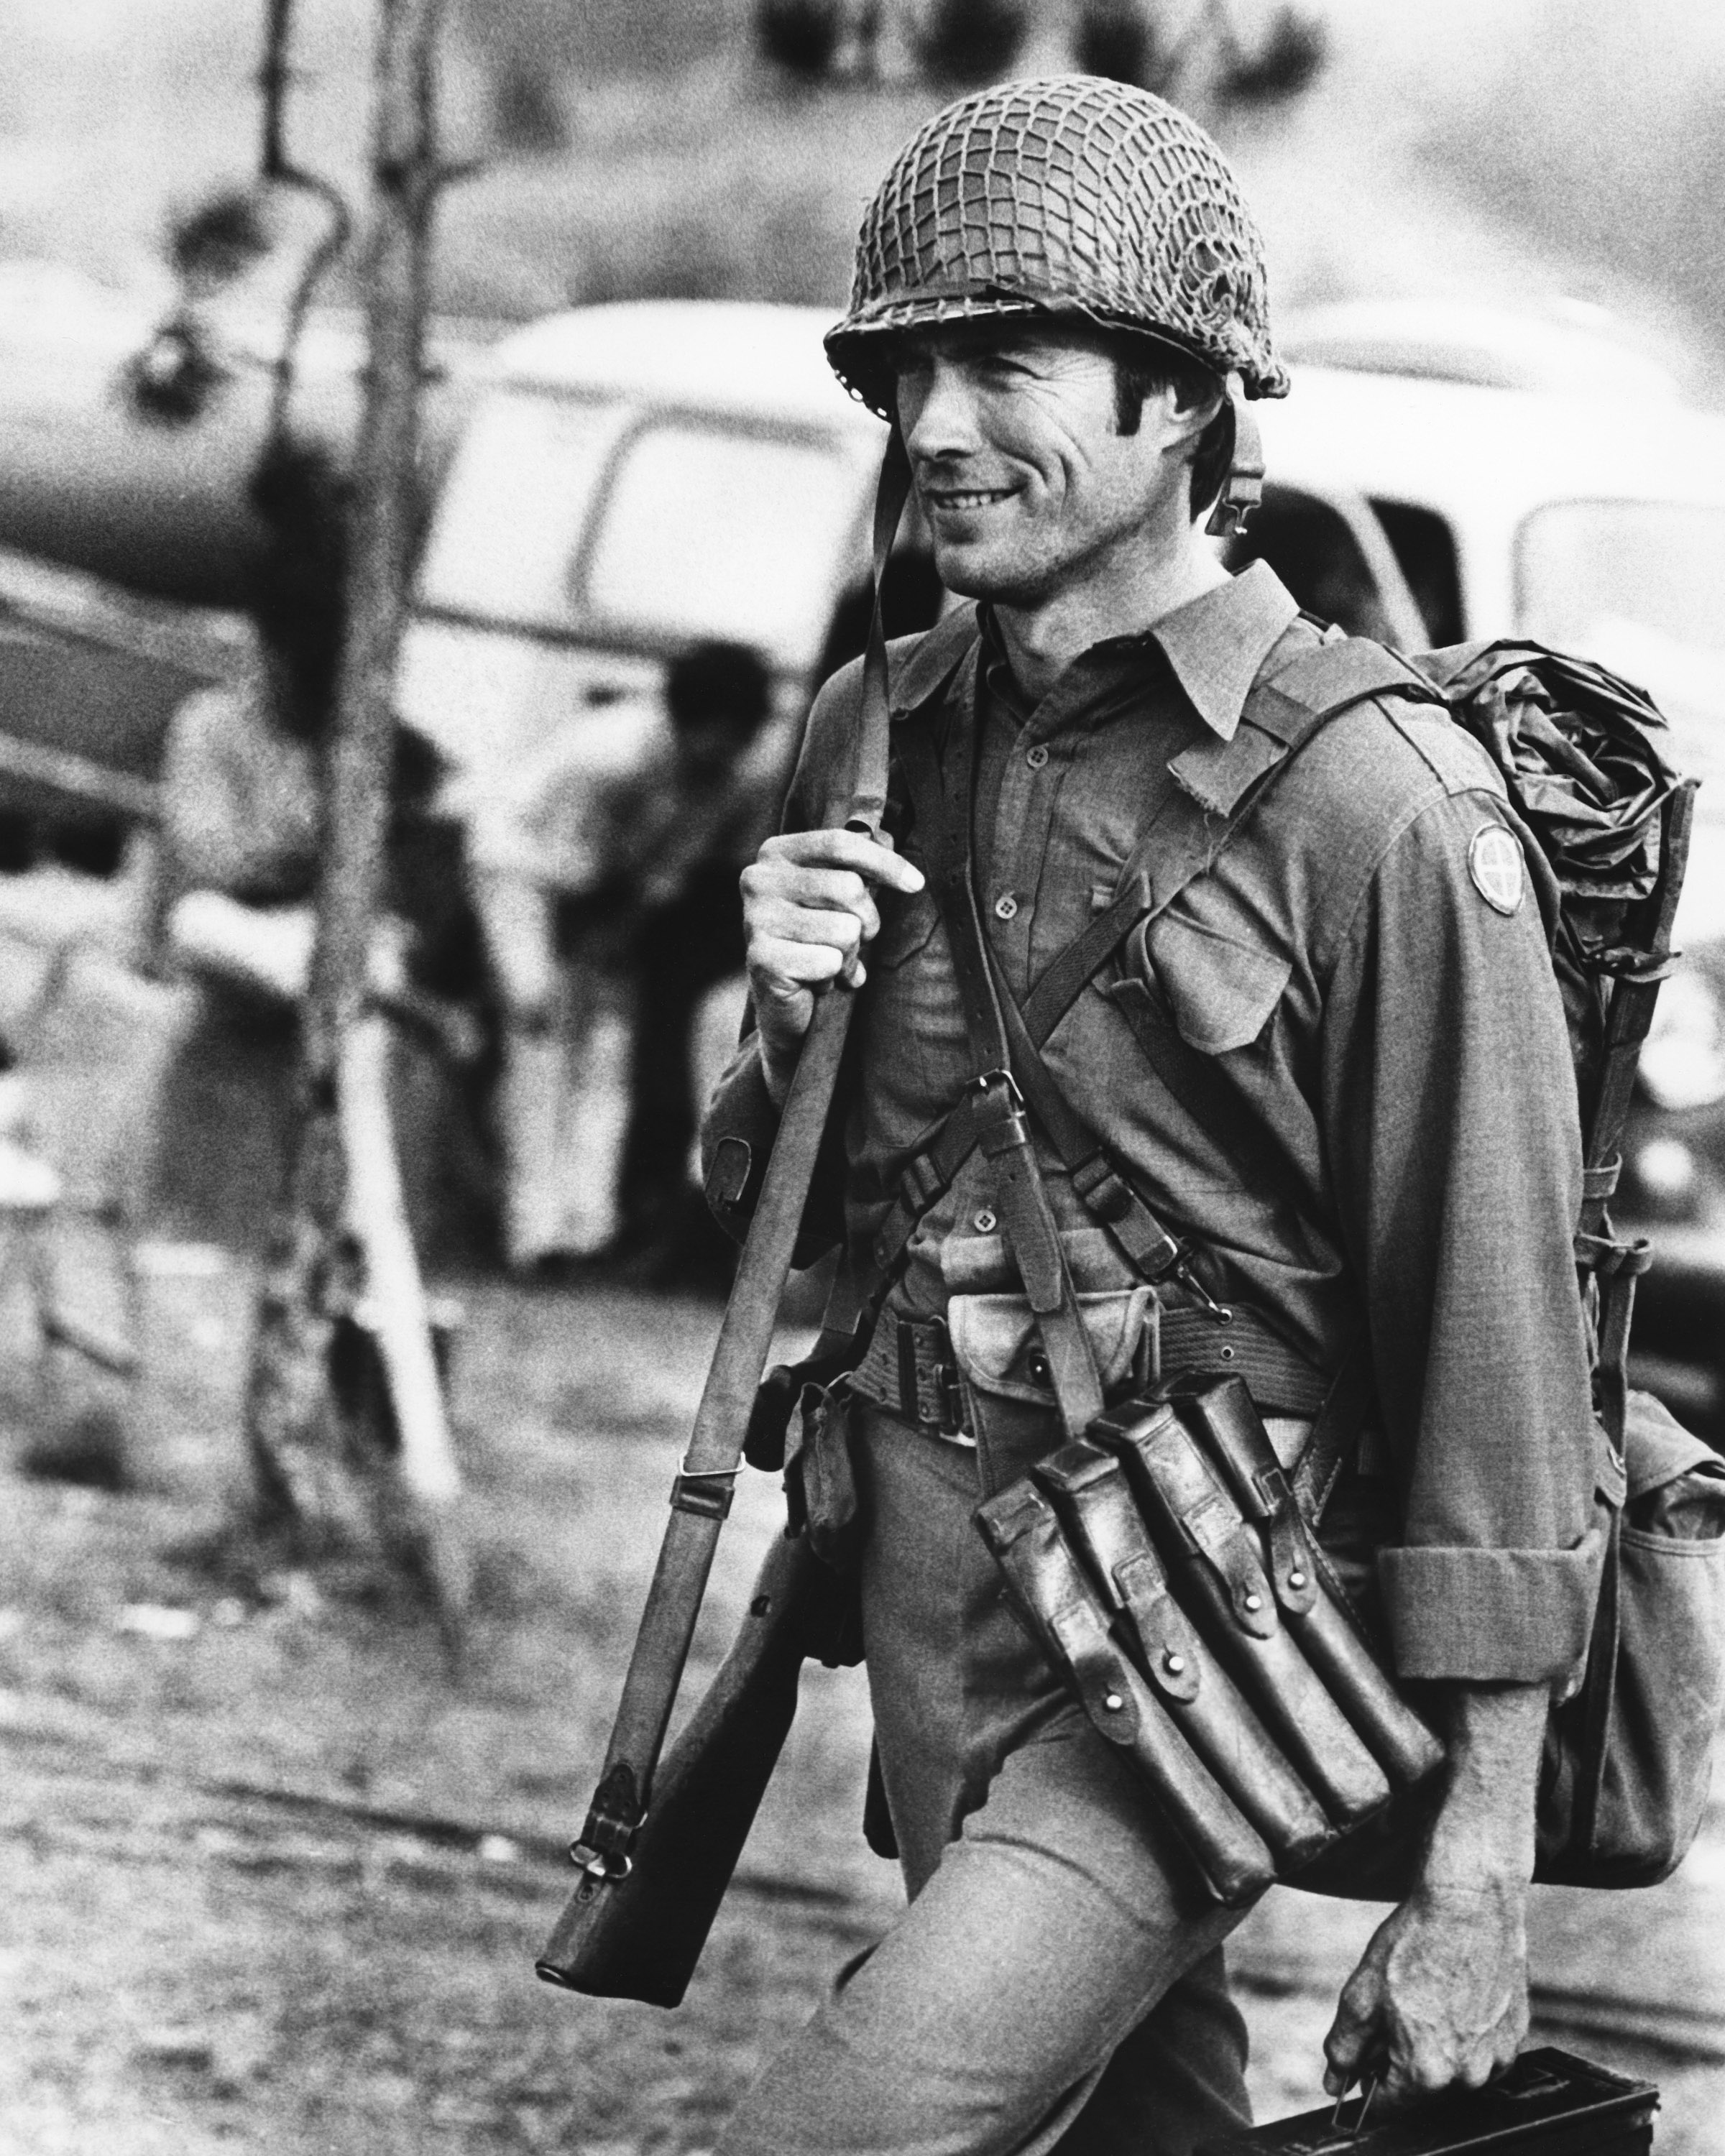 Clint Eastwood as Private Kelly in the war film 'Kelly's Heroes', in 1970. | Source: Getty Images